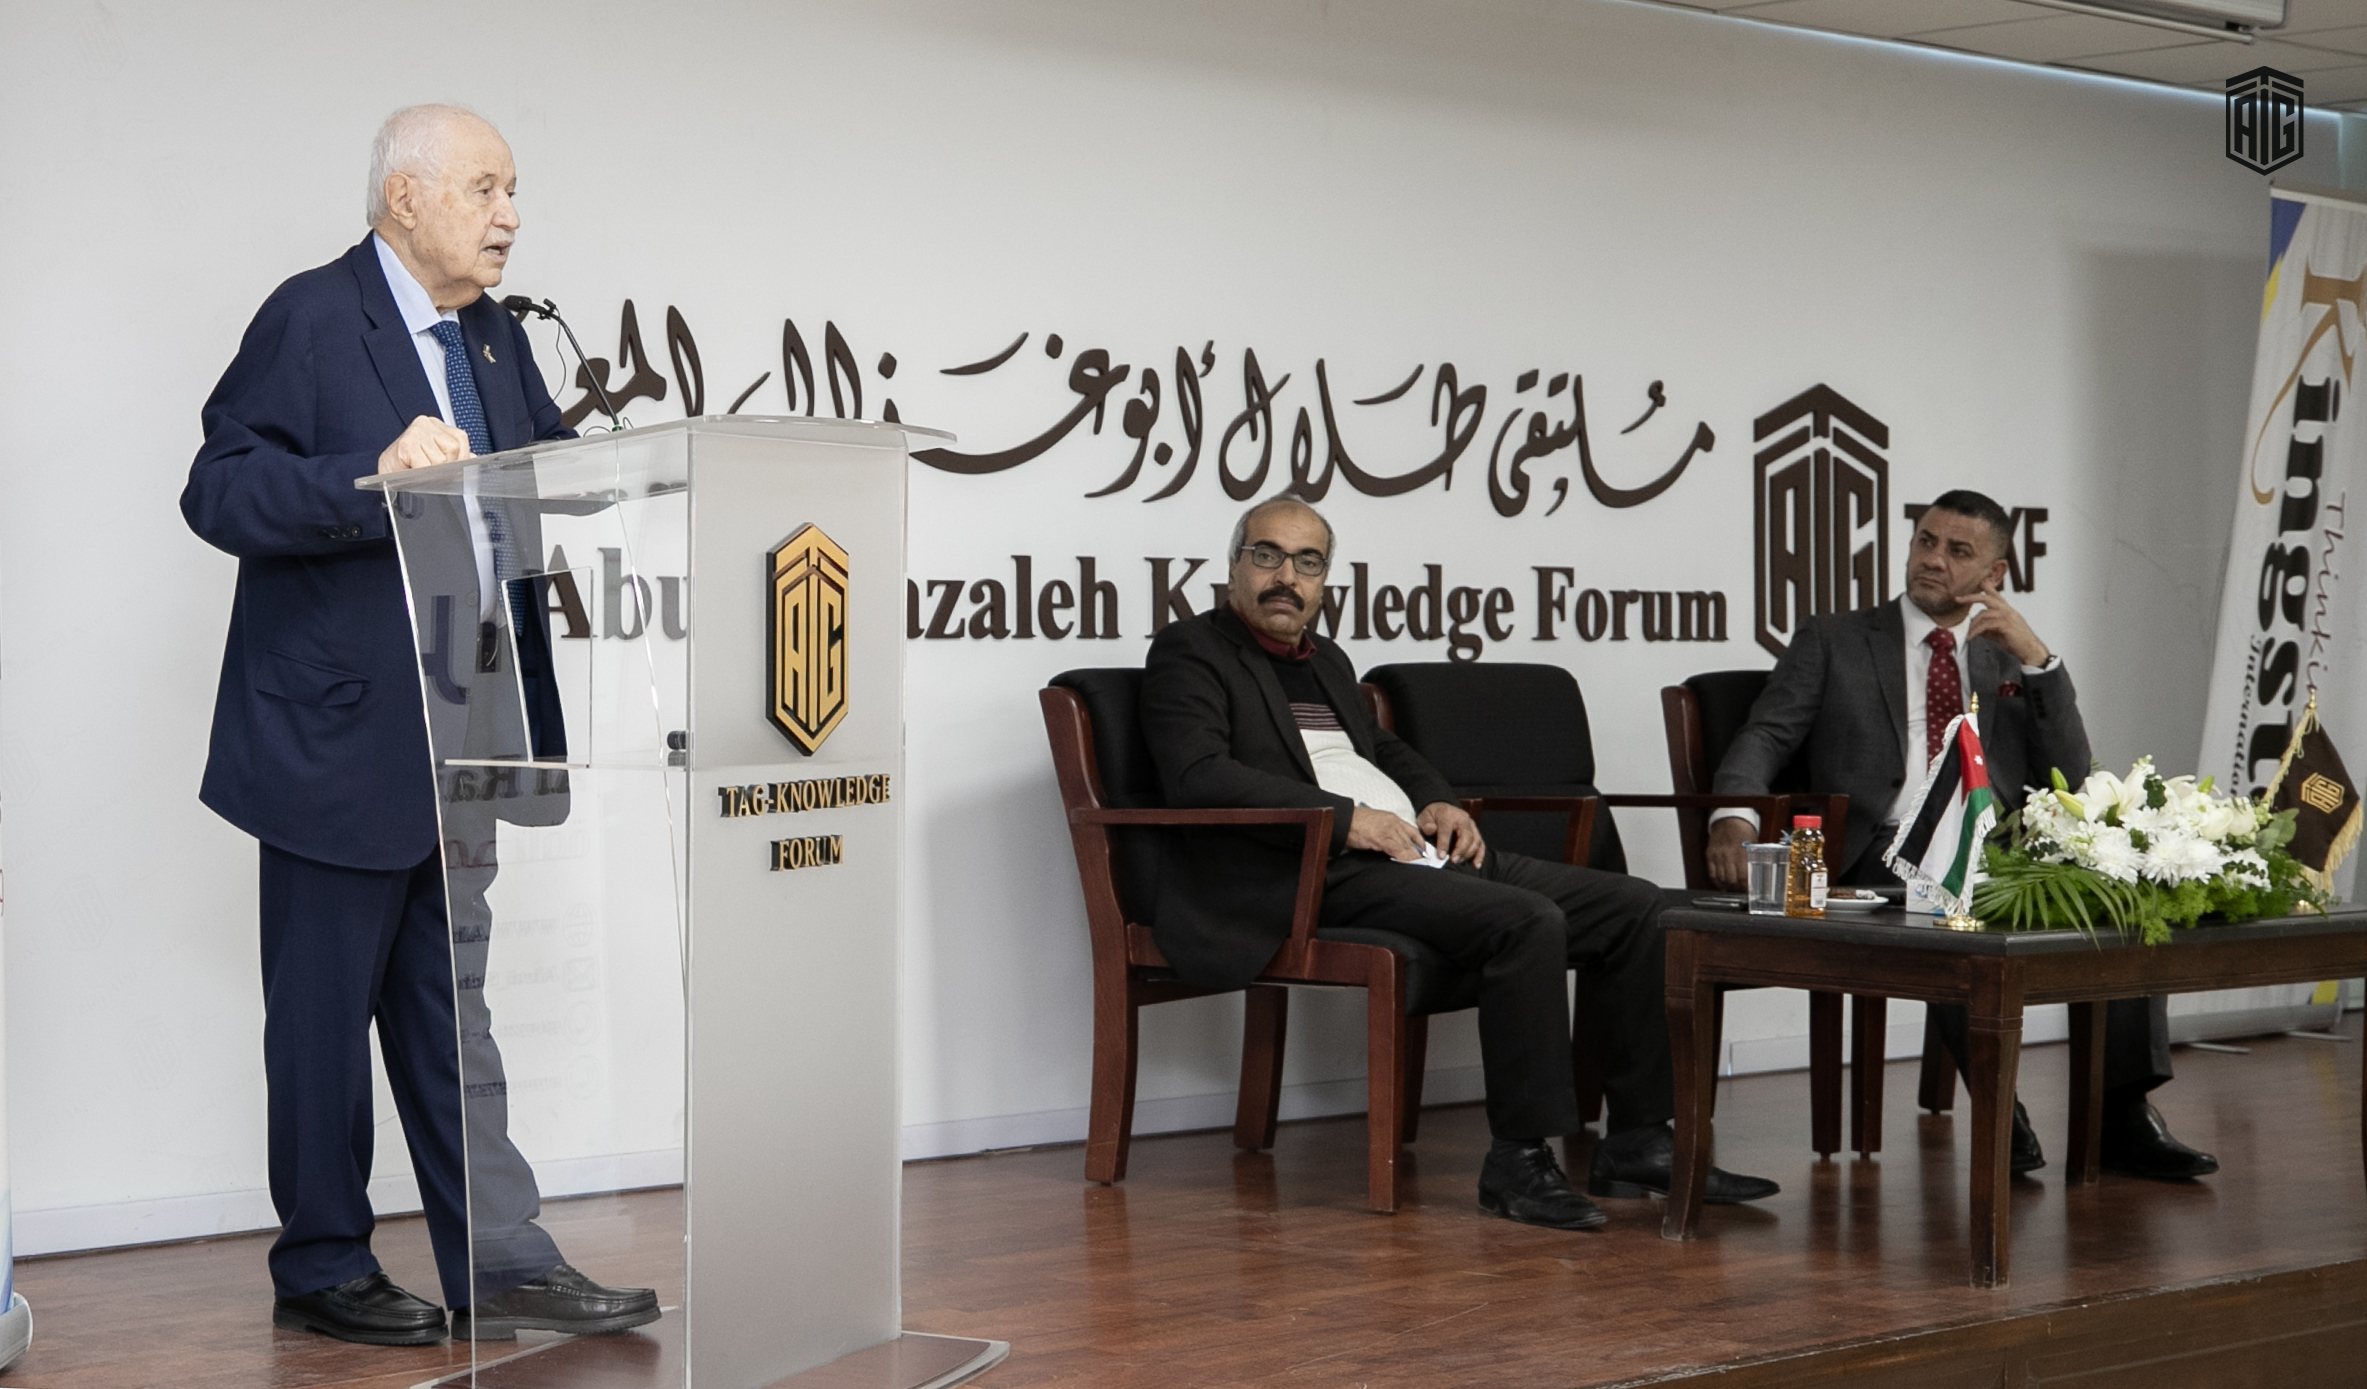 ‘Abu-Ghazaleh Global’, AlRai and Kingston Schools, and Ministry of Culture Launch ‘Read to Learn’ Initiative